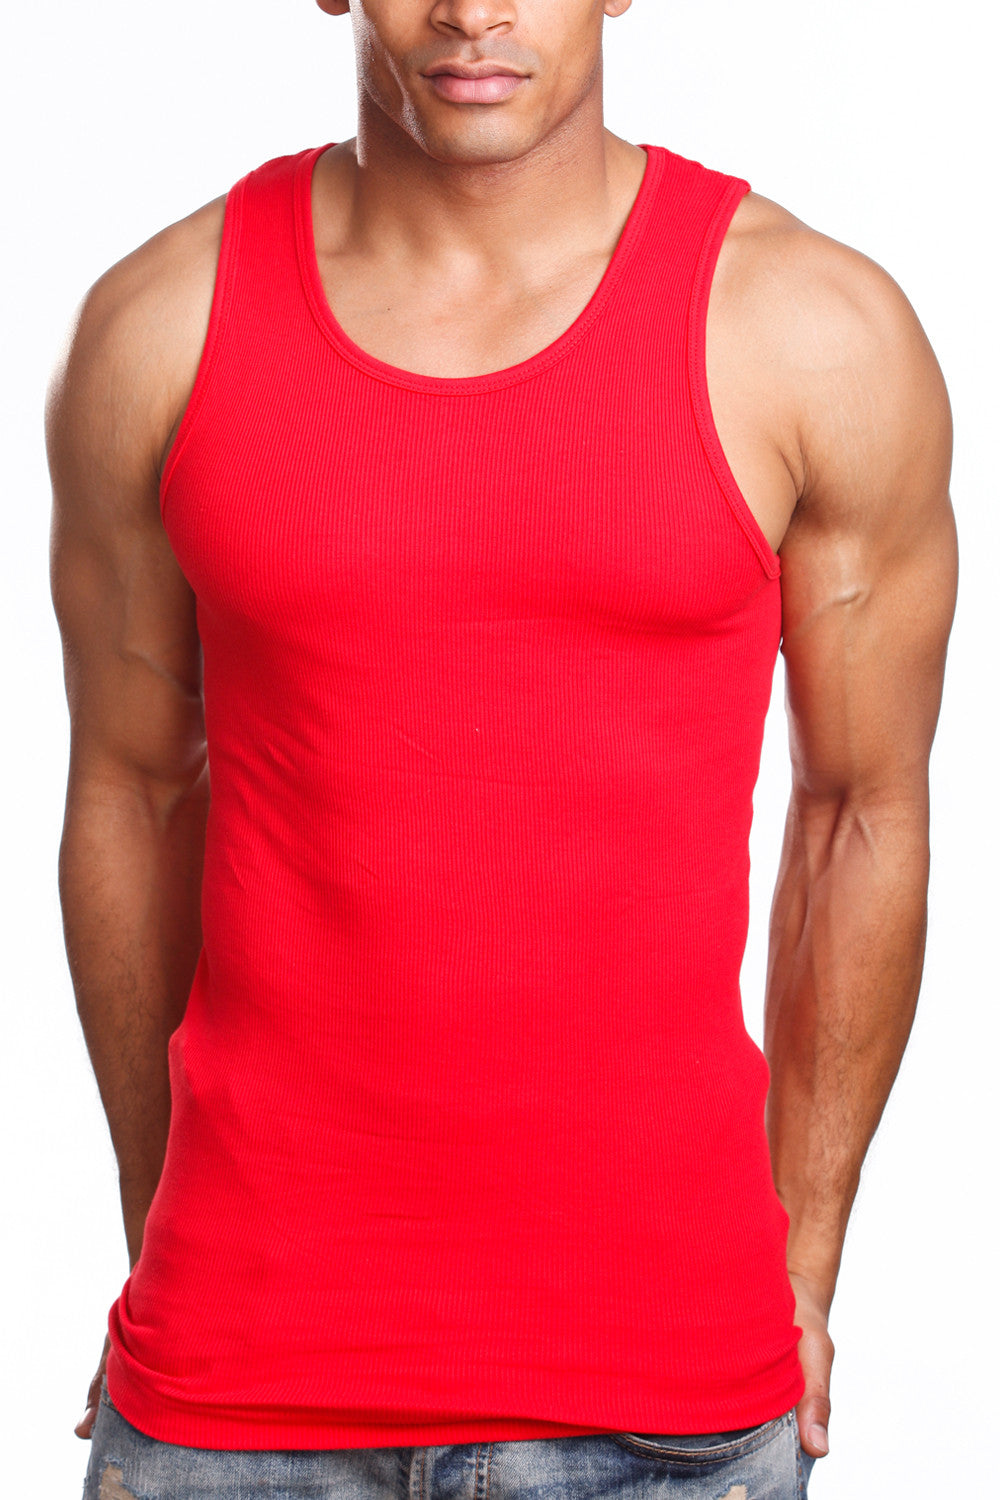 red muscle shirt